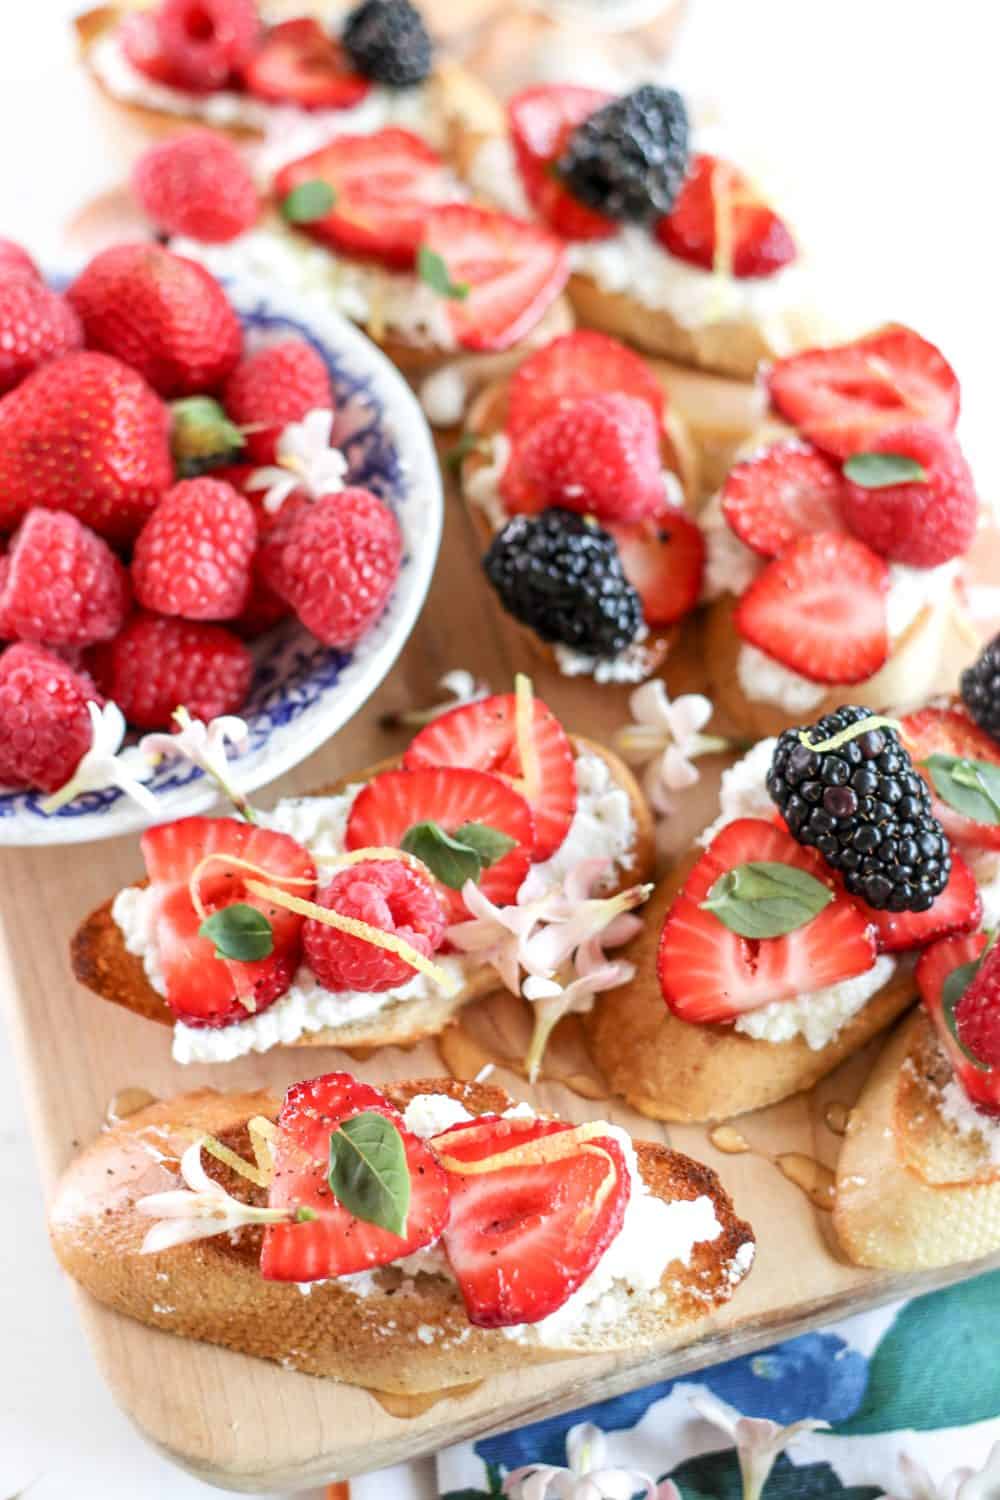 berry crostini with strawberries, blueberries and blackberries